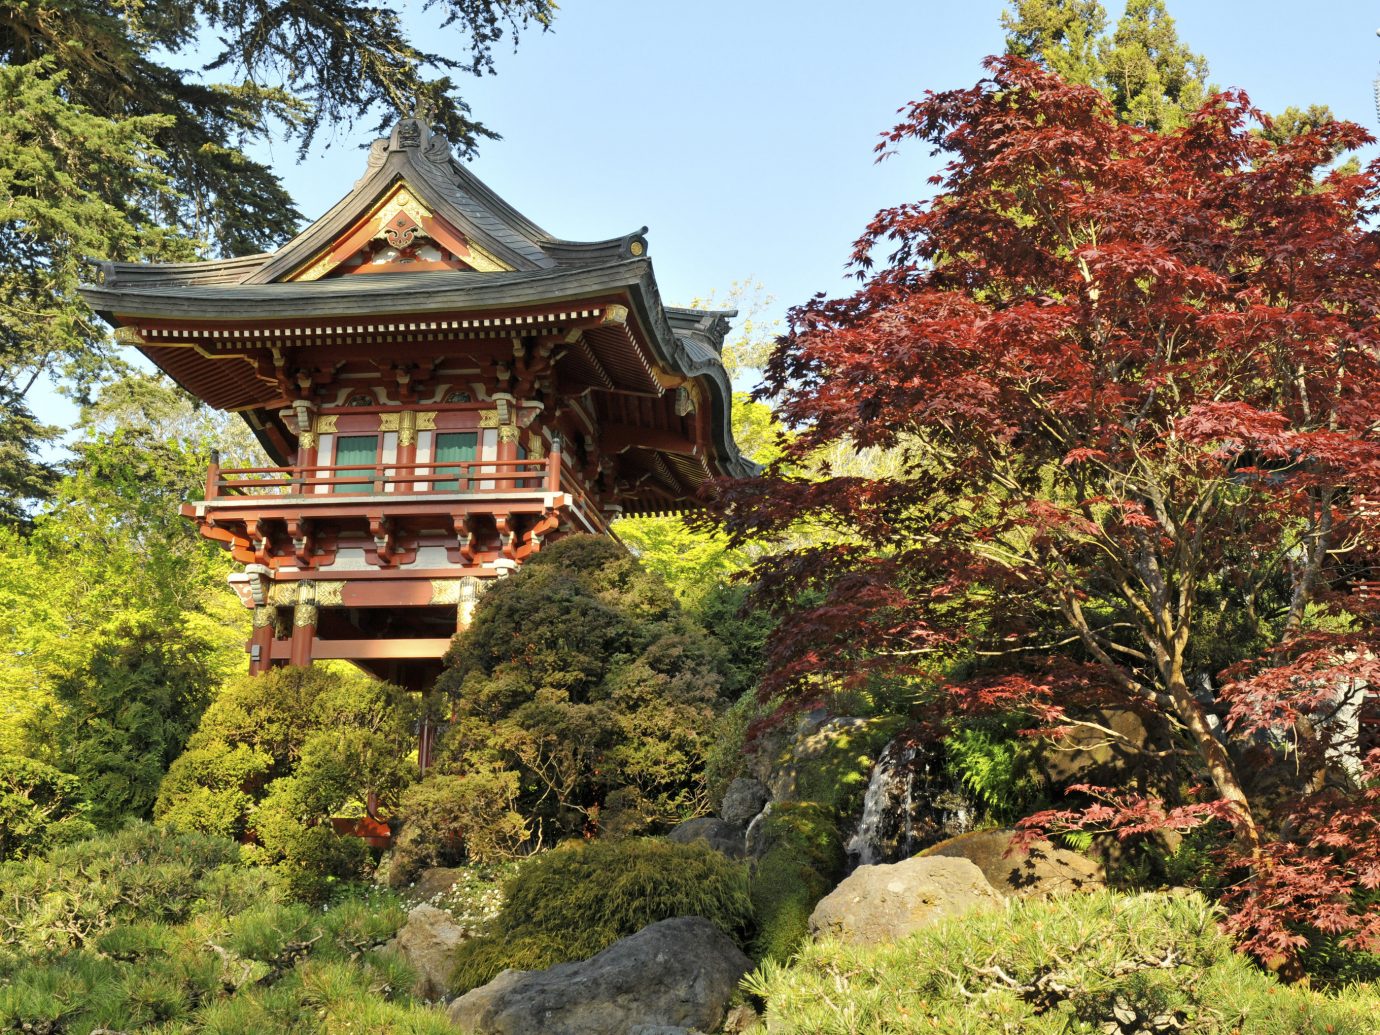 Beauty Health + Wellness Japan Kyoto San Francisco Travel Tips chinese architecture Nature leaf tree plant autumn Garden pagoda botanical garden tourist attraction house landscape shinto shrine temple outdoor structure estate shrub landscaping grass